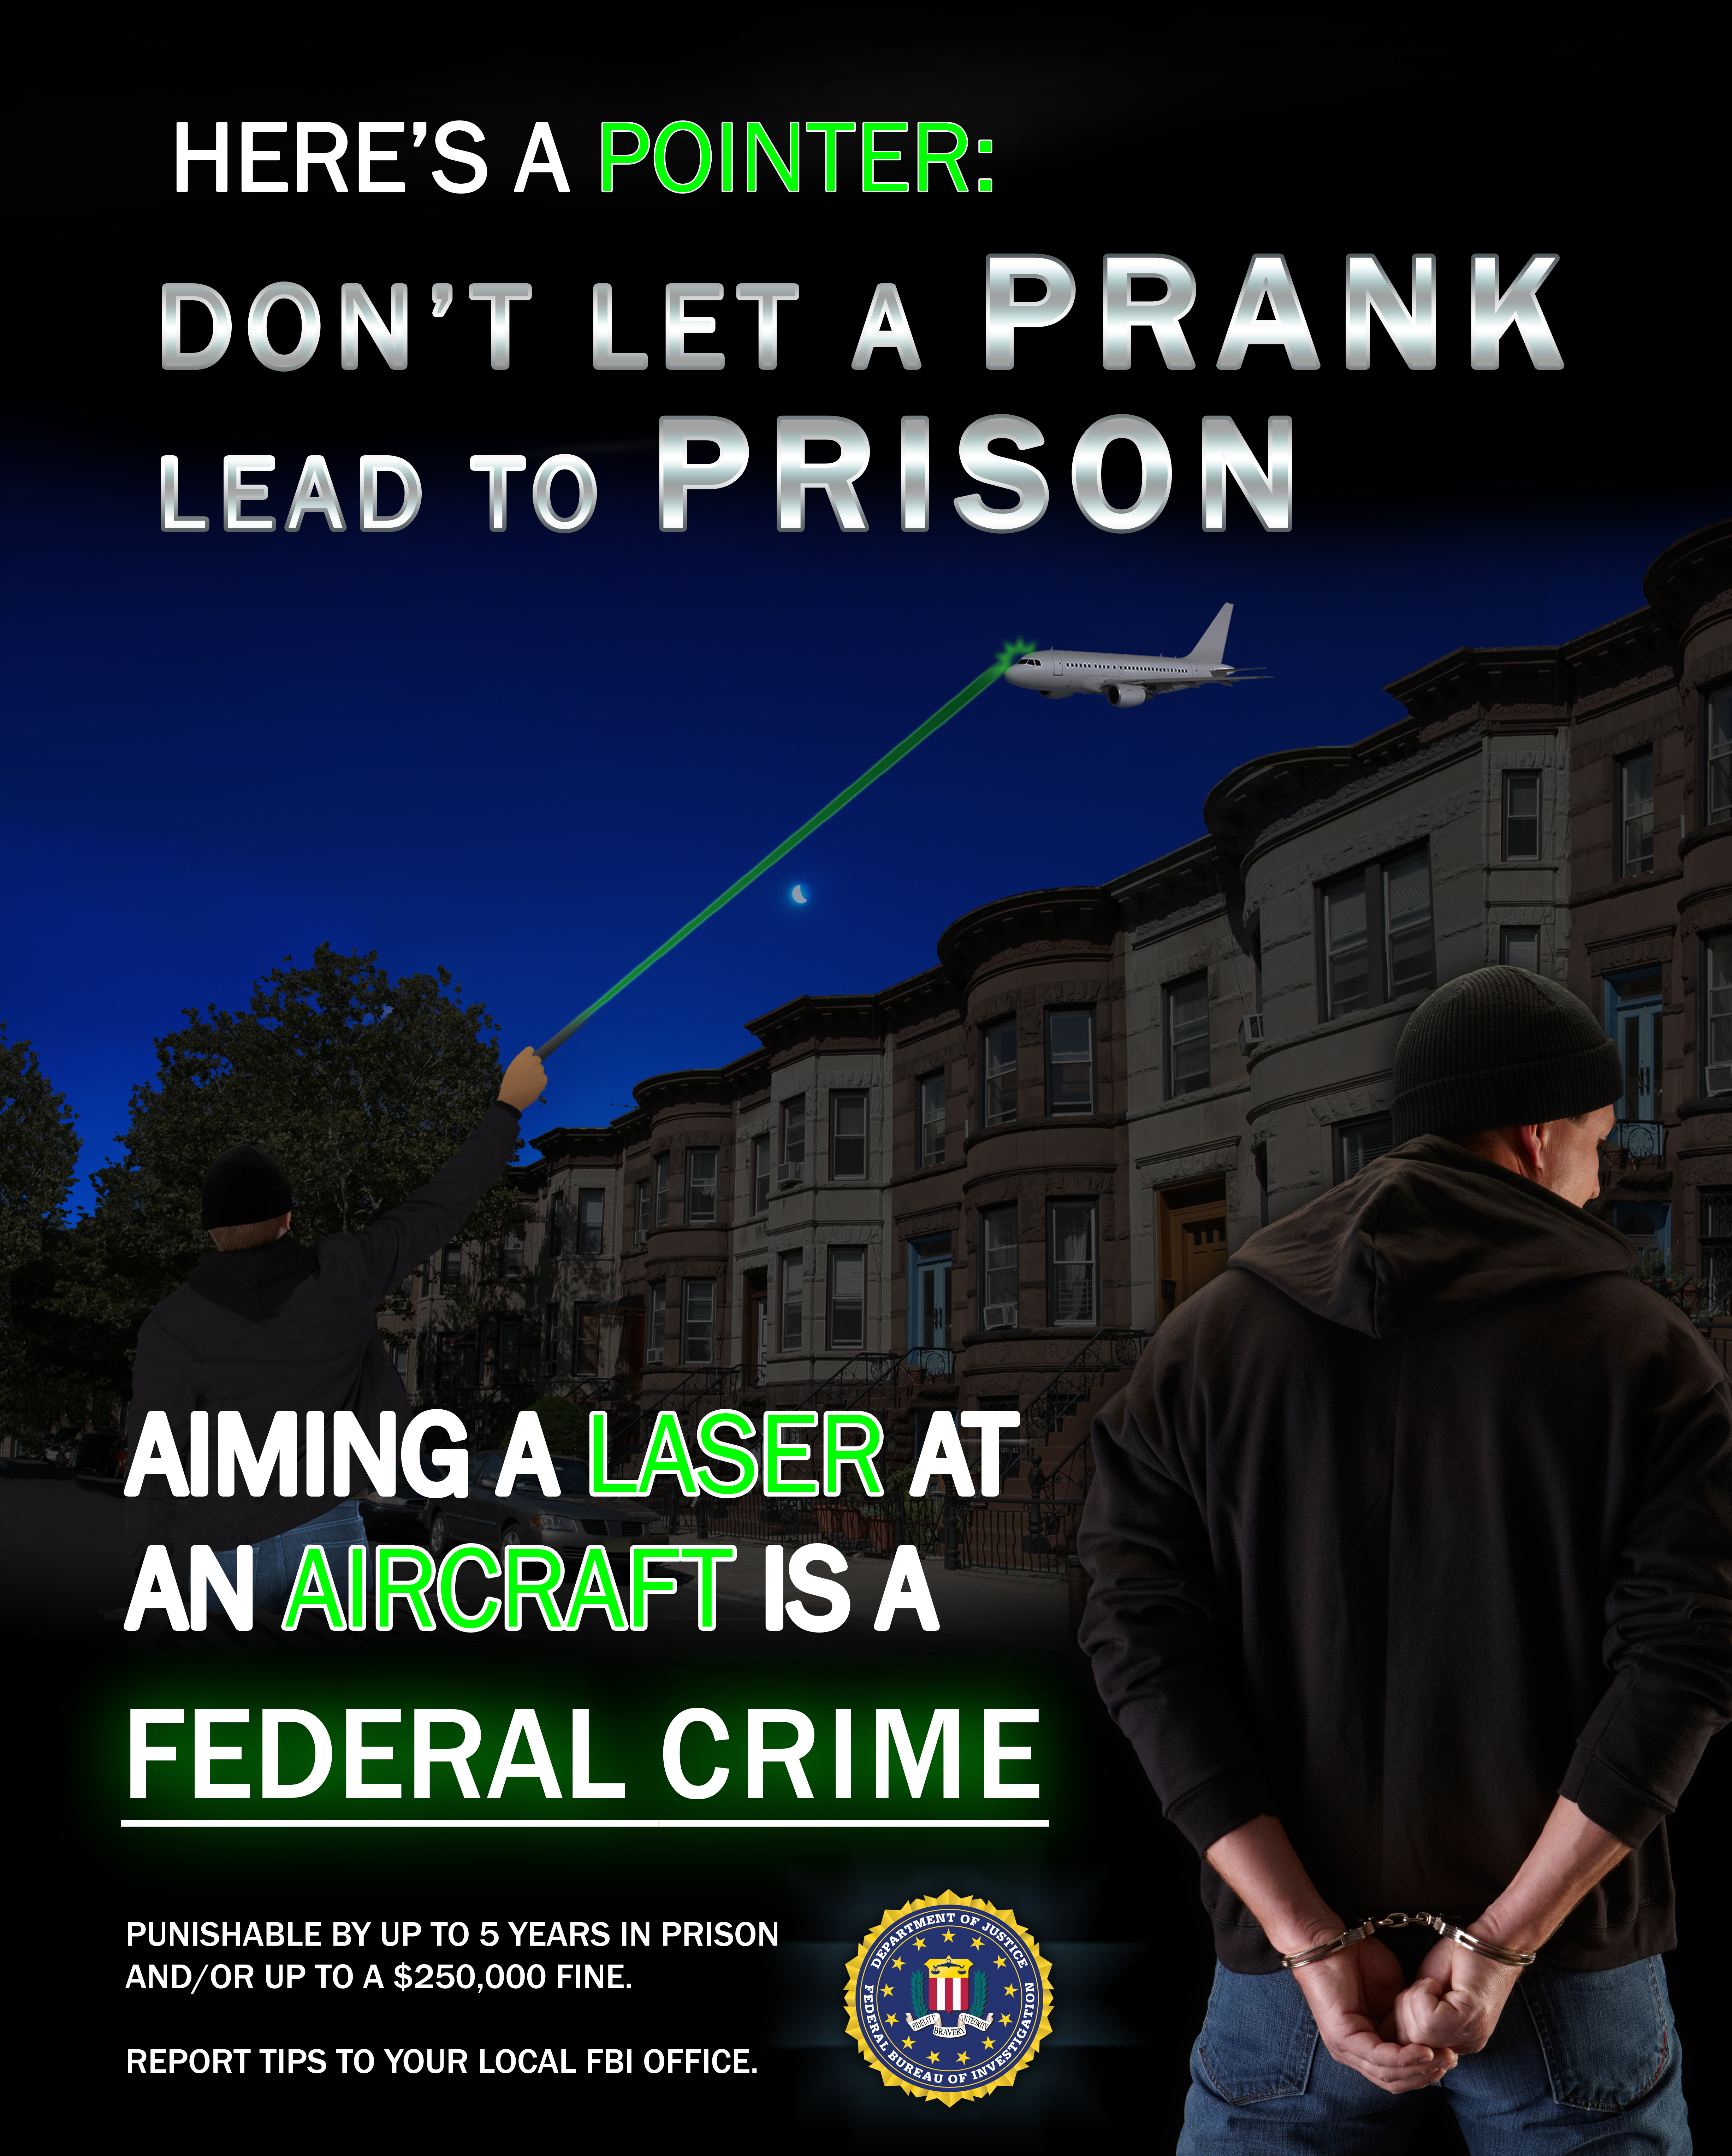 Protecting Aircraft from Lasers Poster (Urban)